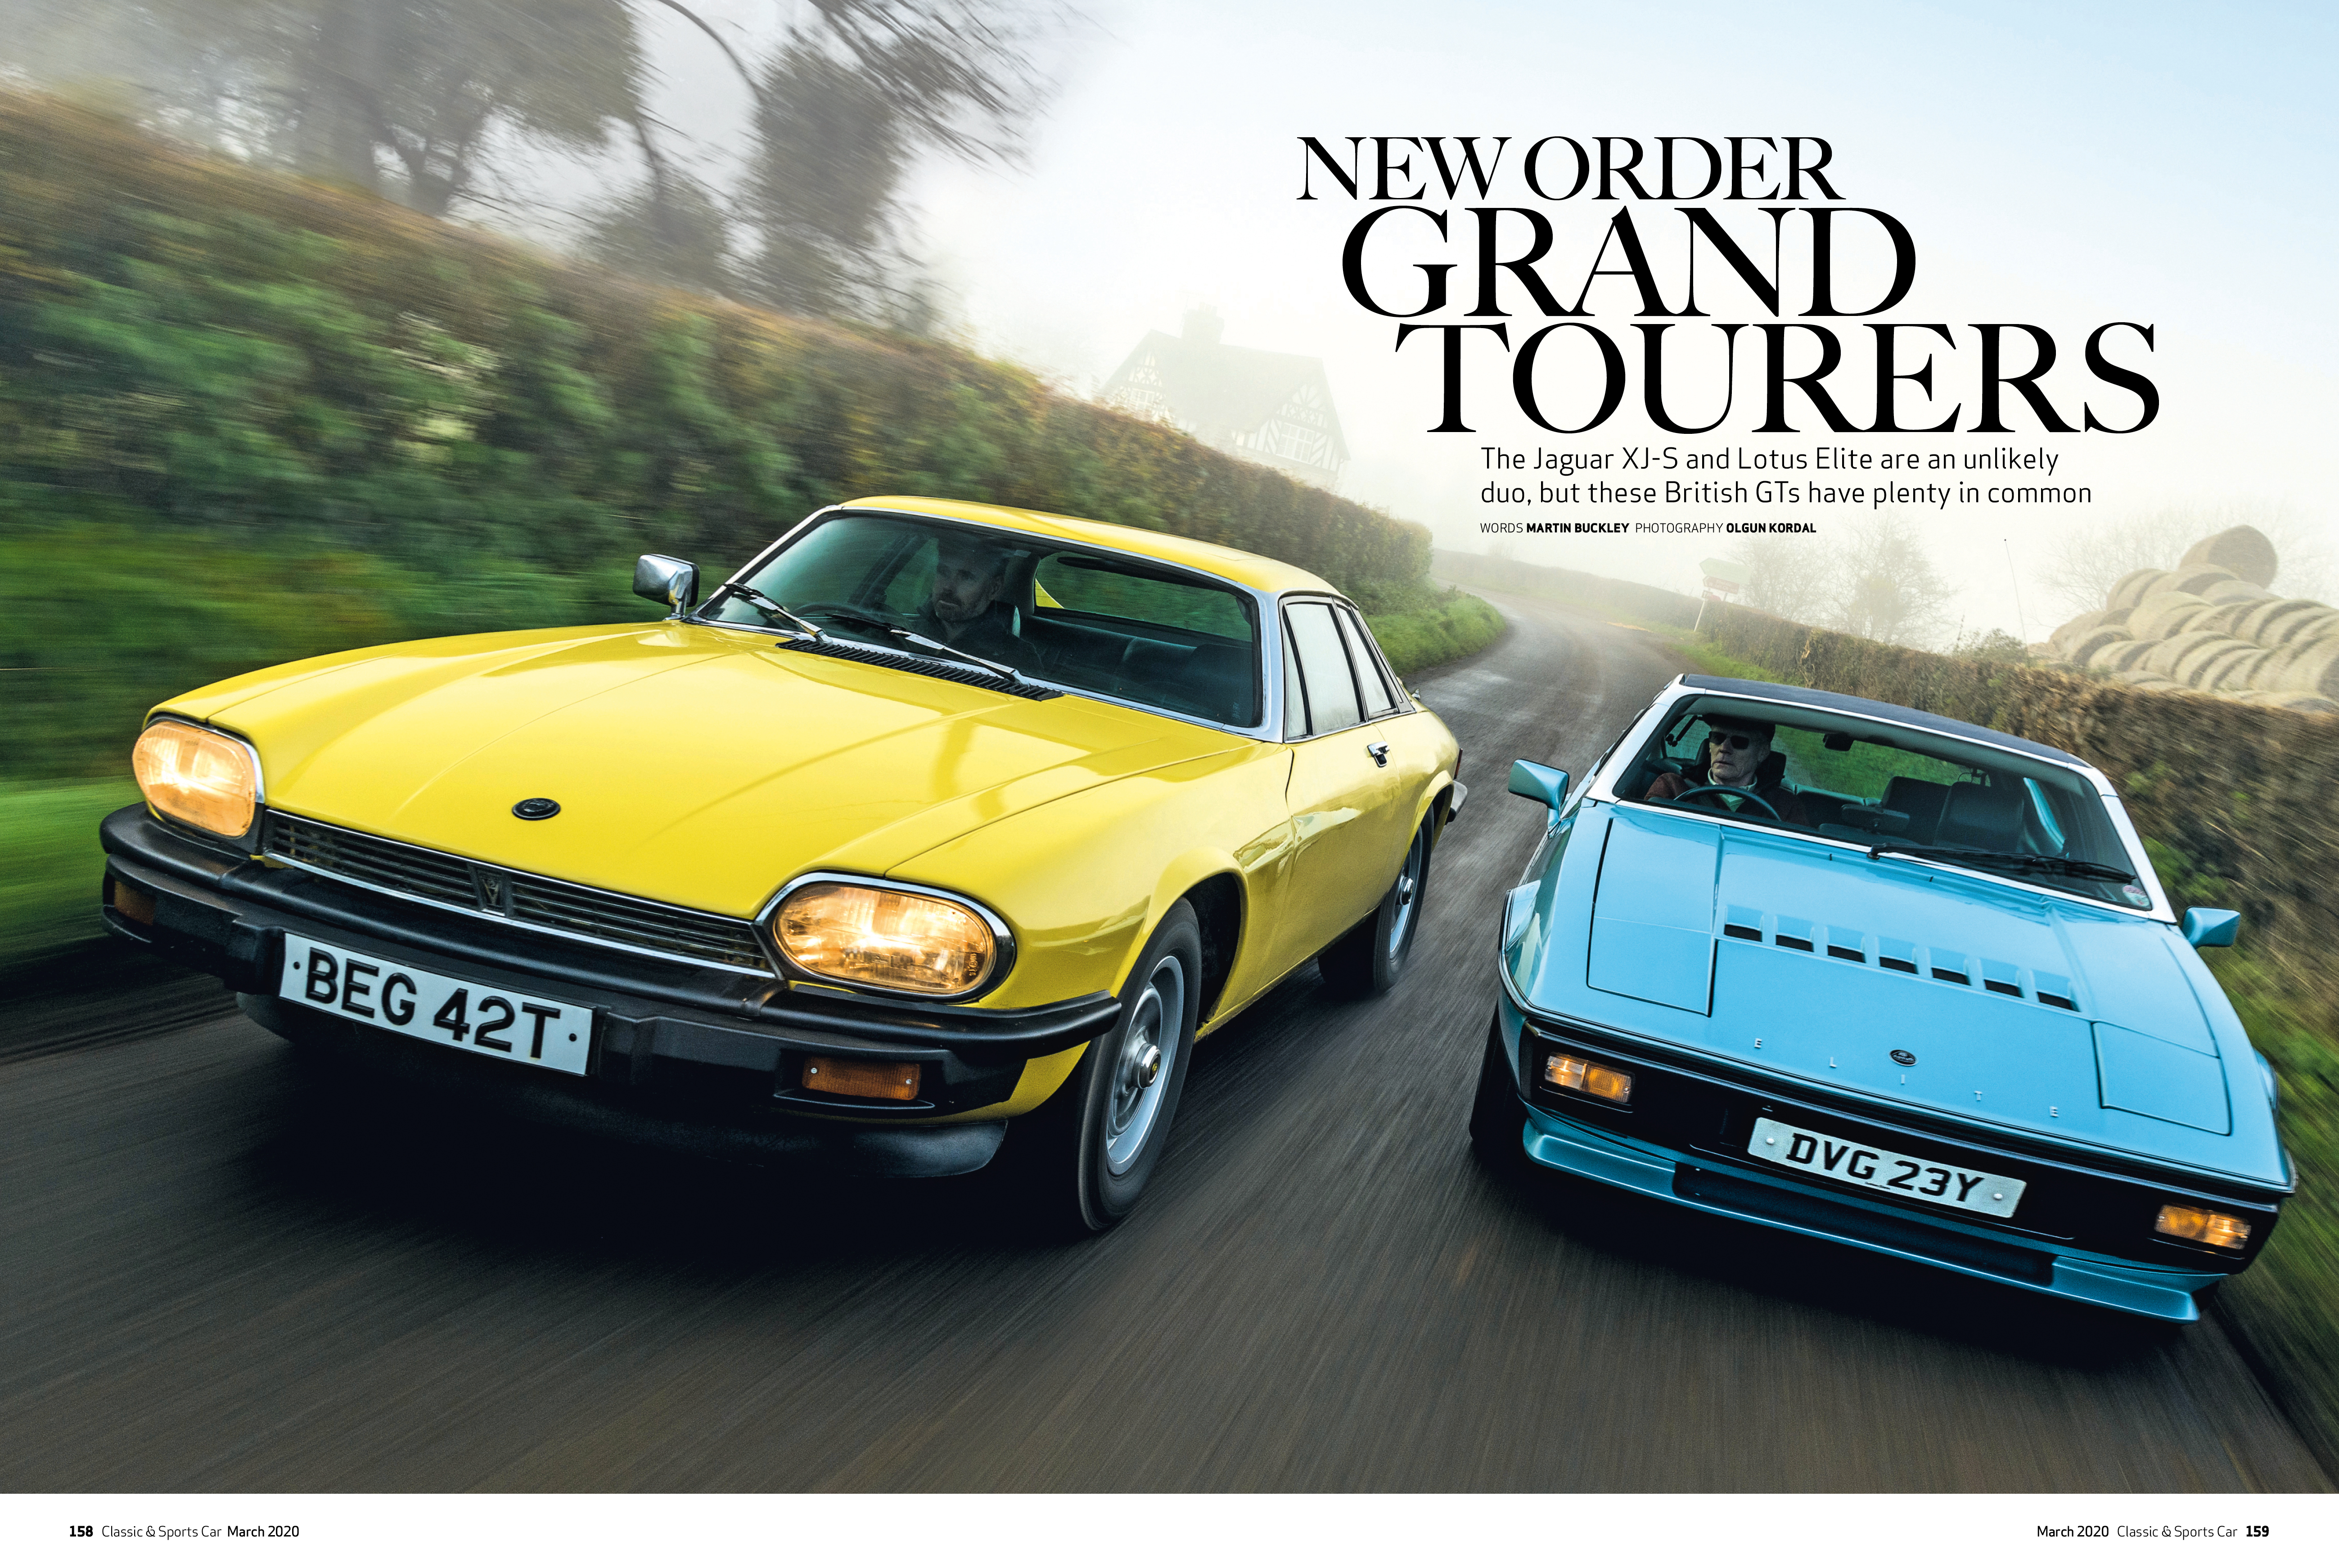 240Z stars in Japanese special: Inside the March 2020 issue of C&SC